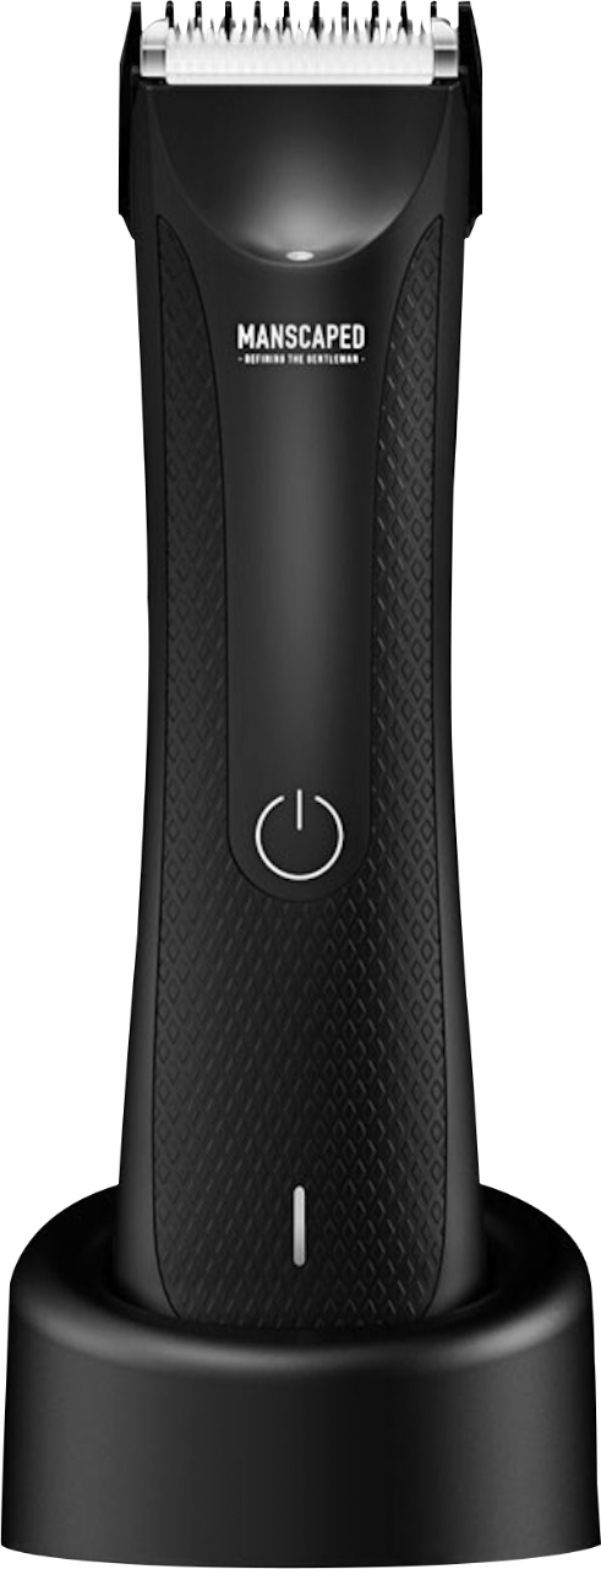 Manscaped The Lawn Mower 3.0 Rechargeable Wet/Dry Hair Trimmer Black MAN-TR3-01 - Best Buy | Best Buy U.S.